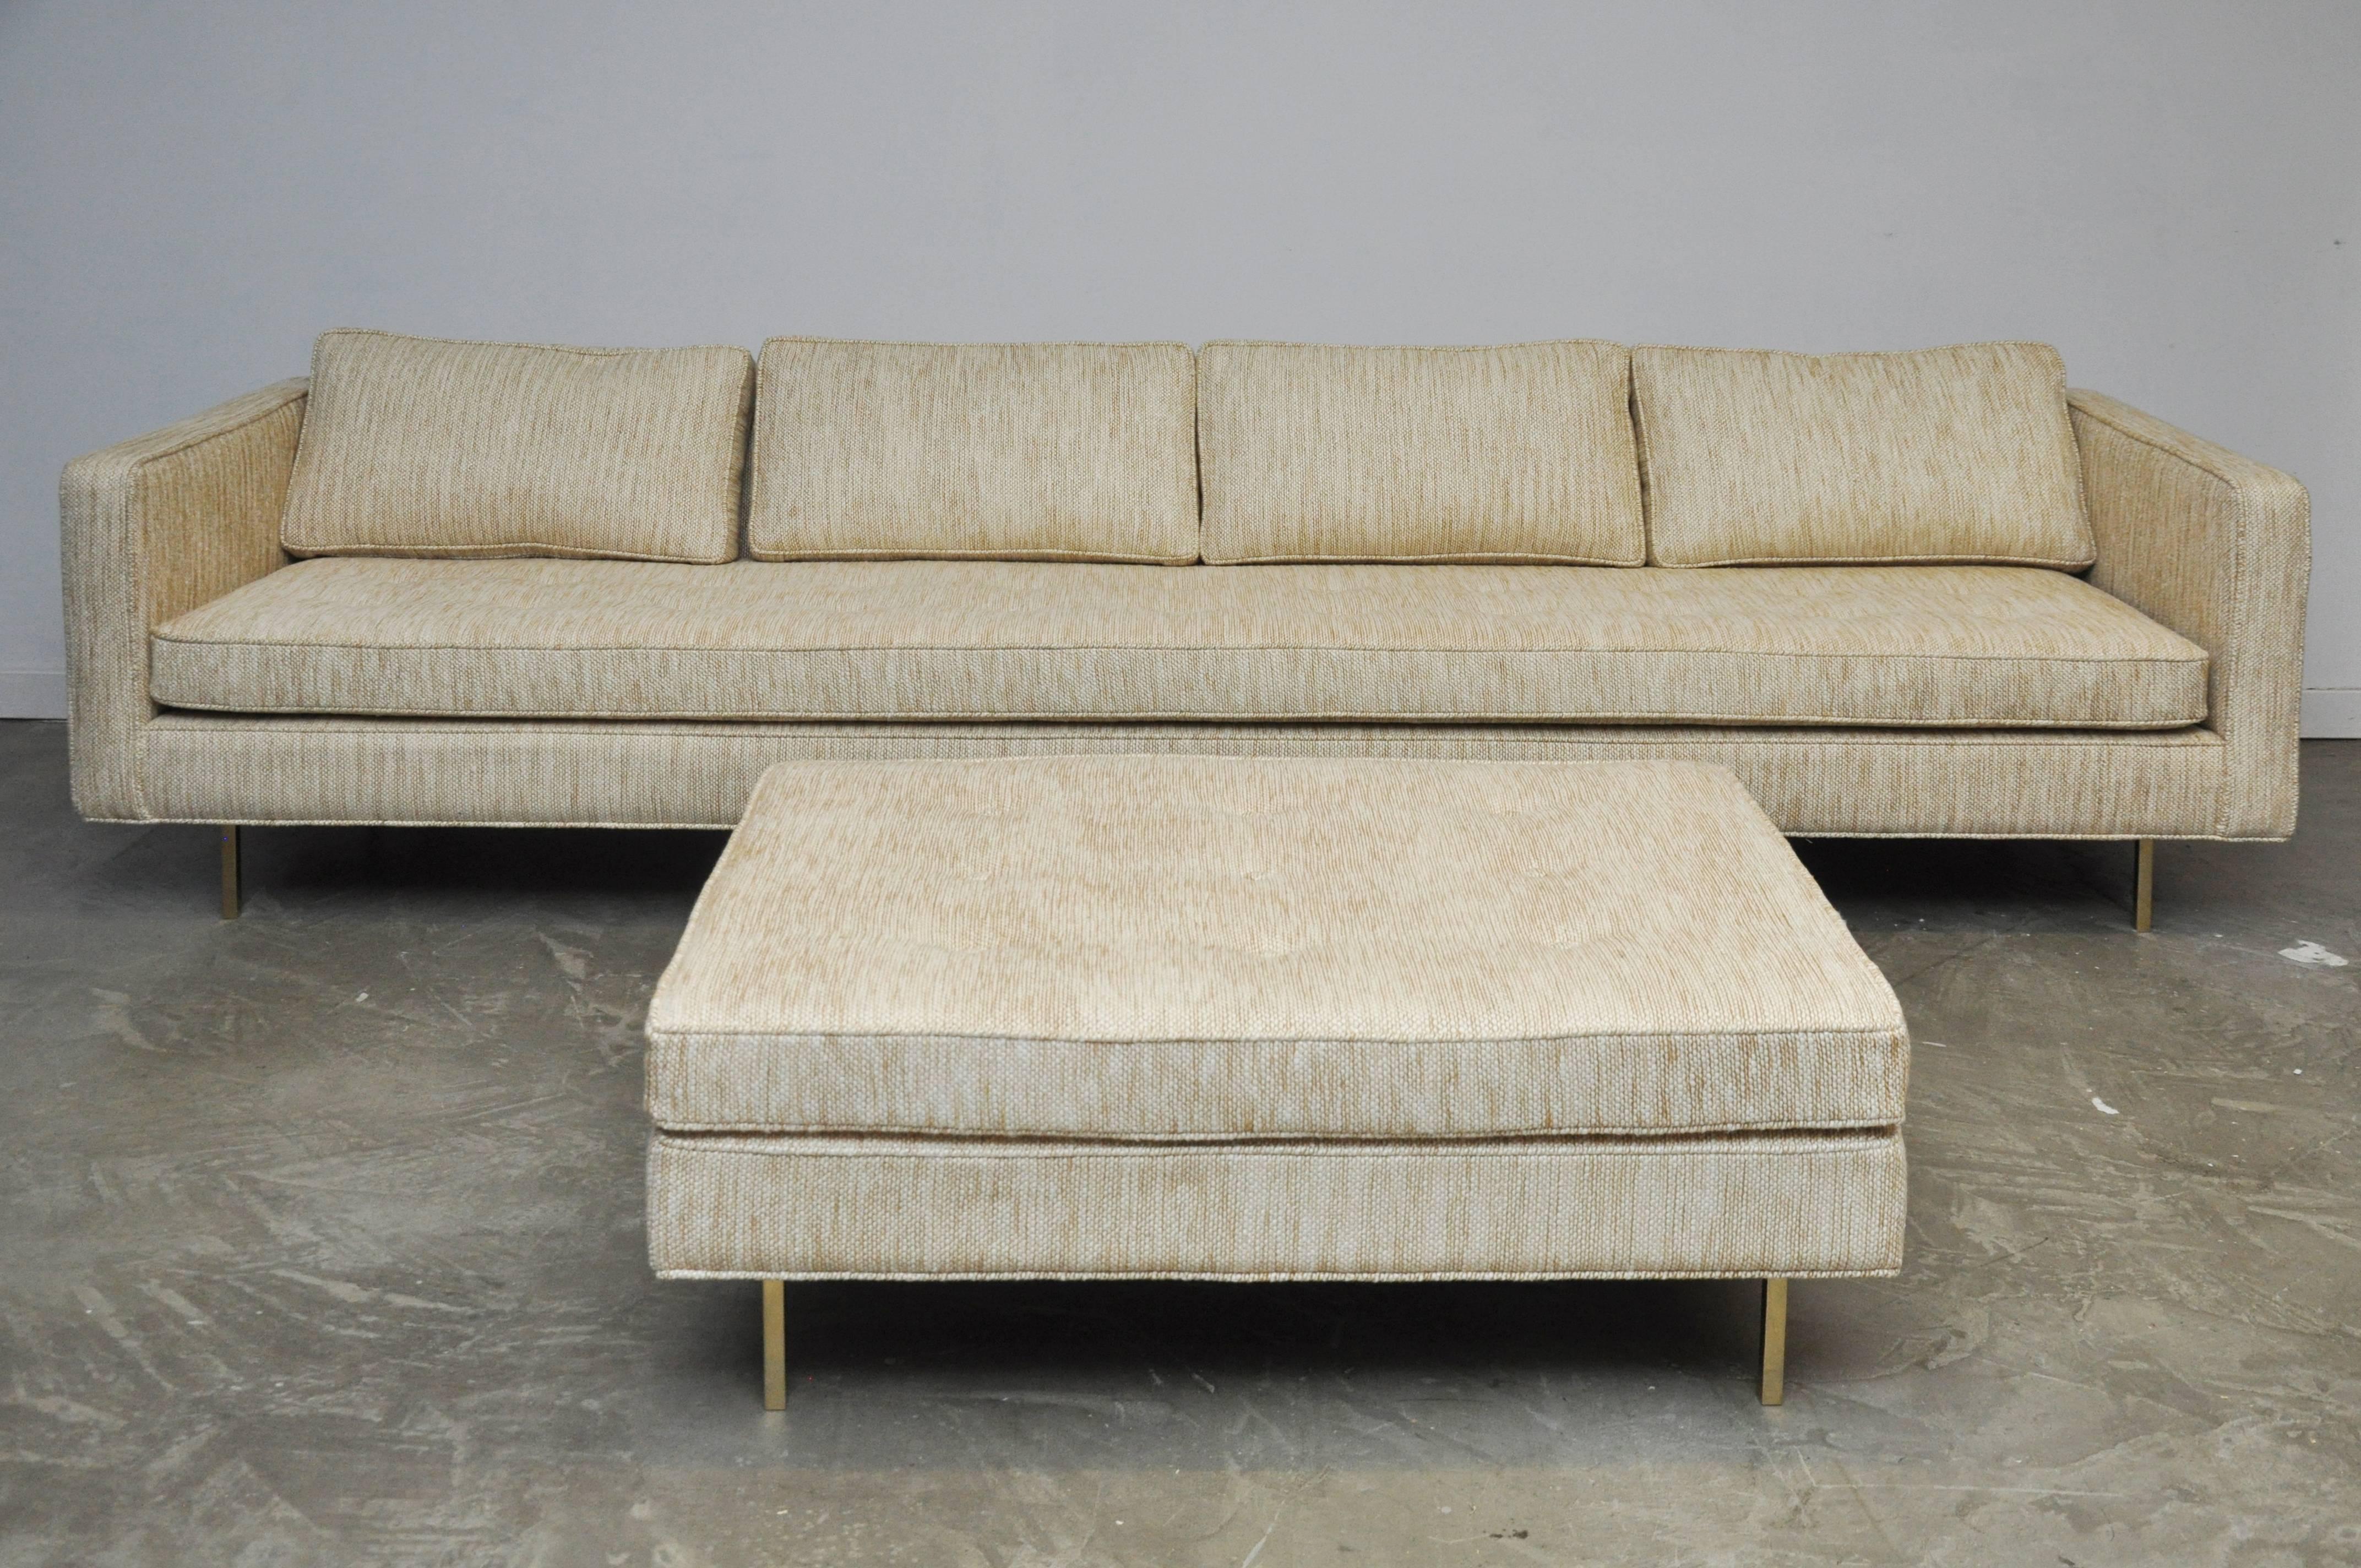 Even arm sofa with matching ottoman by Harvey Probber. Fully restored.  Beautiful new woven fabric, new foam and feathers on polished brass legs.

Measures: Sofa 113 long x 33 deep x 31 tall, 17 seat
Ottoman 42 x 30 x 17 tall.

 